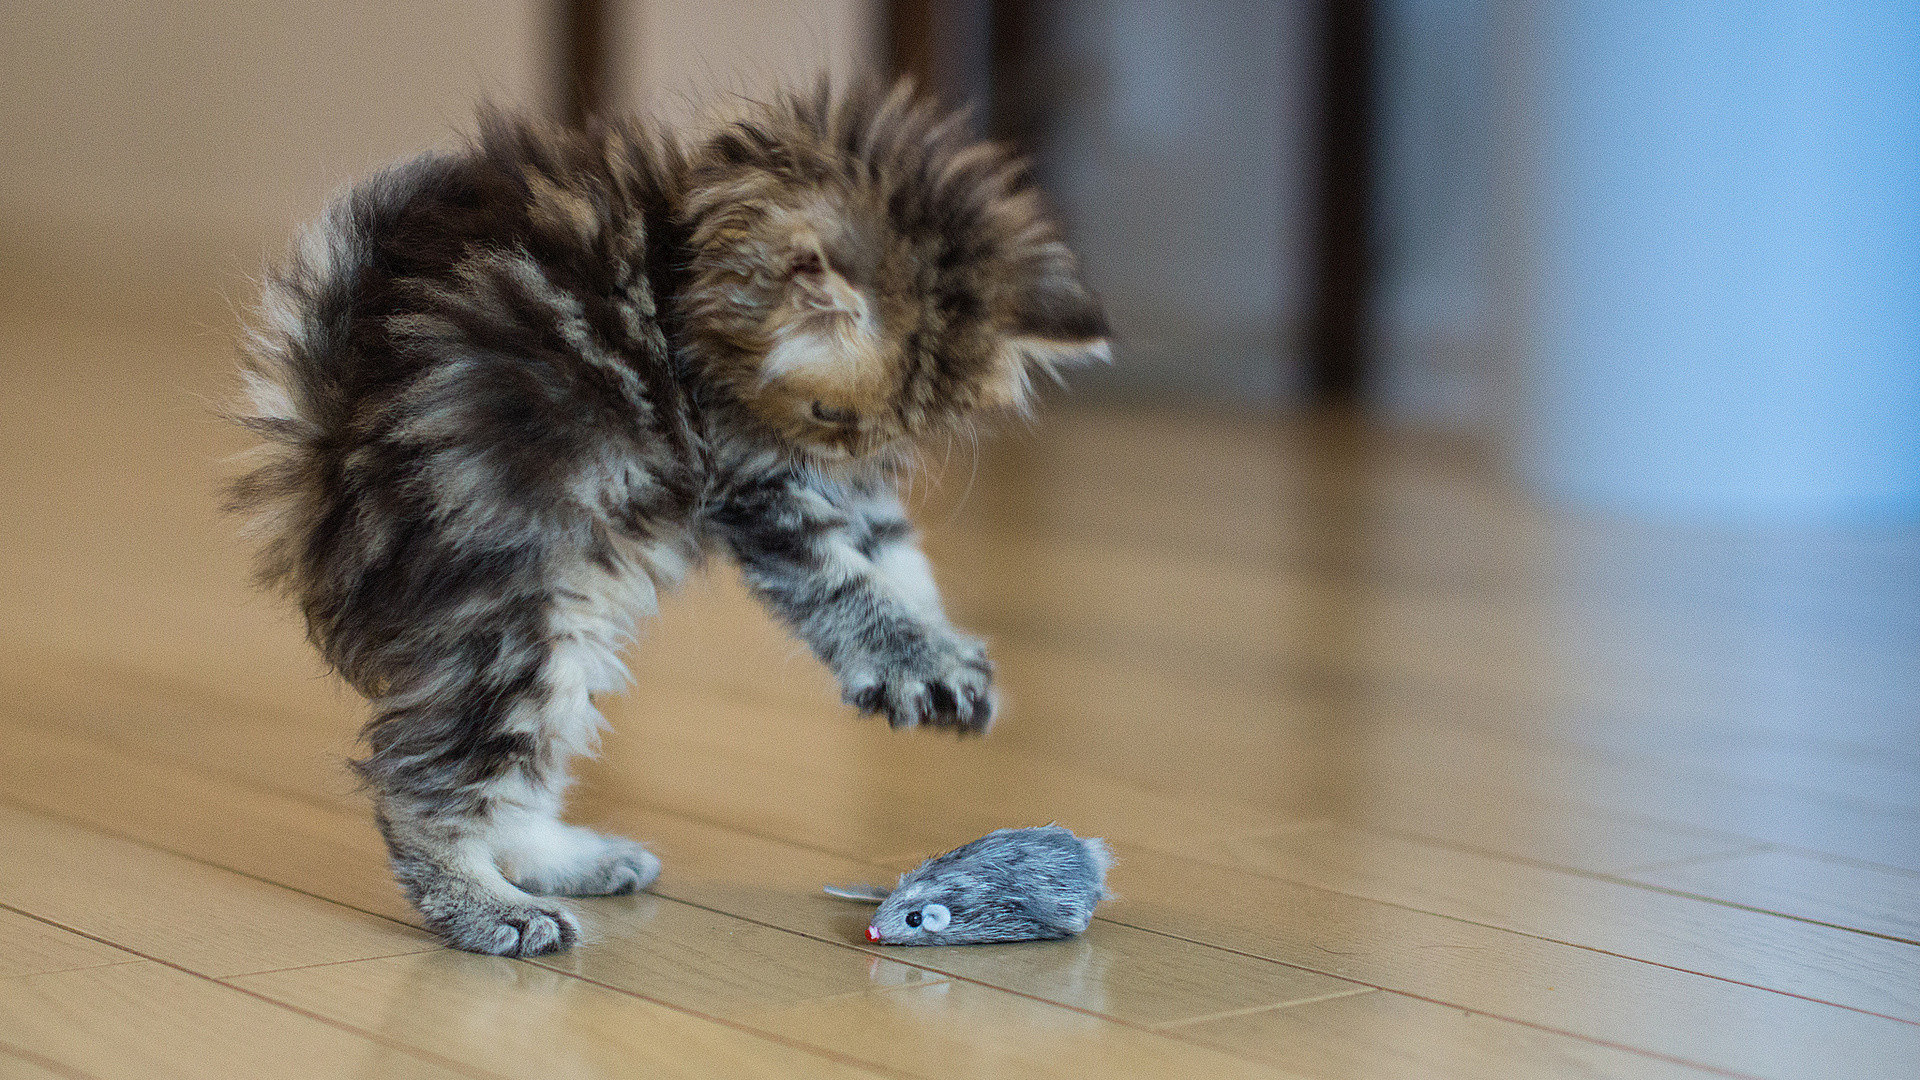 Cool Collections Of Cat Wallpapers 40 For Desktop, - Cat Playing With Furry Mice Toys - HD Wallpaper 